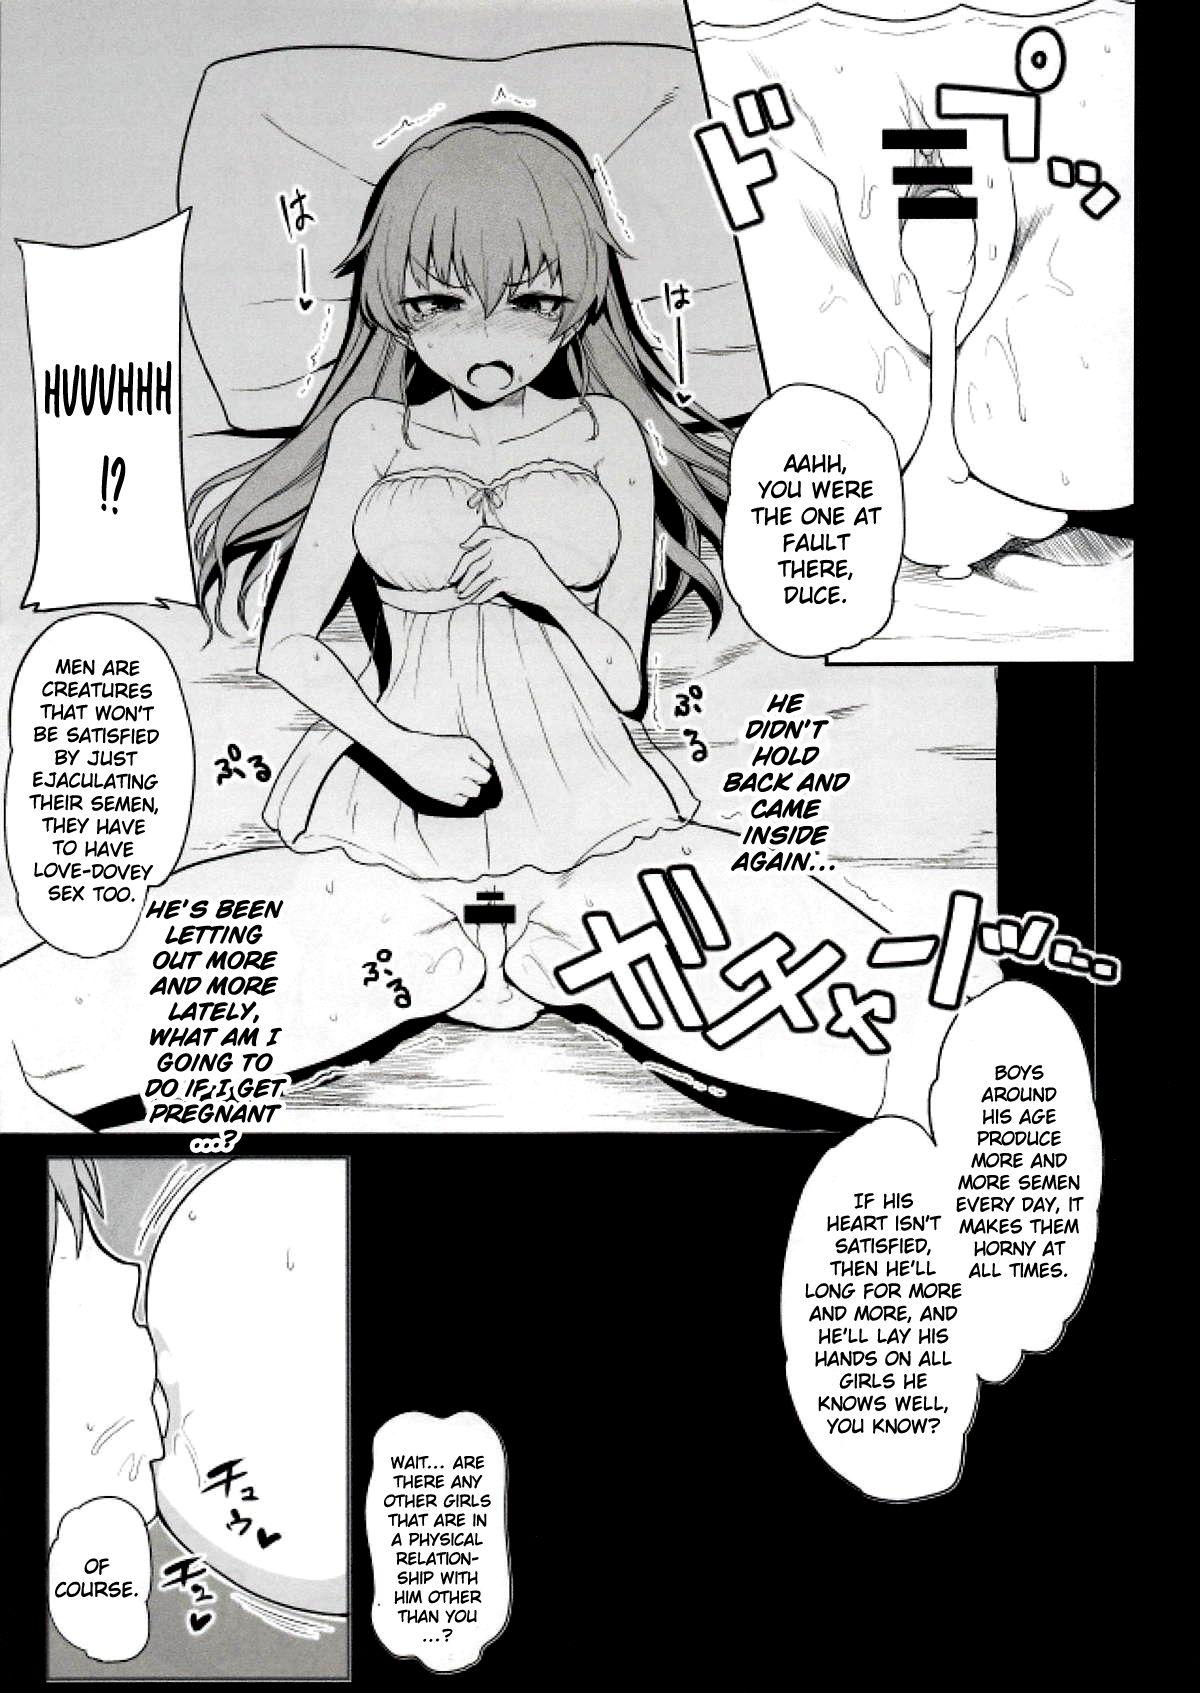 Amateur Sex Raise wa Duce no Otouto ni Naritai | I Want To Become Duce's Little Brother In The Future! - Girls und panzer Virtual - Page 5